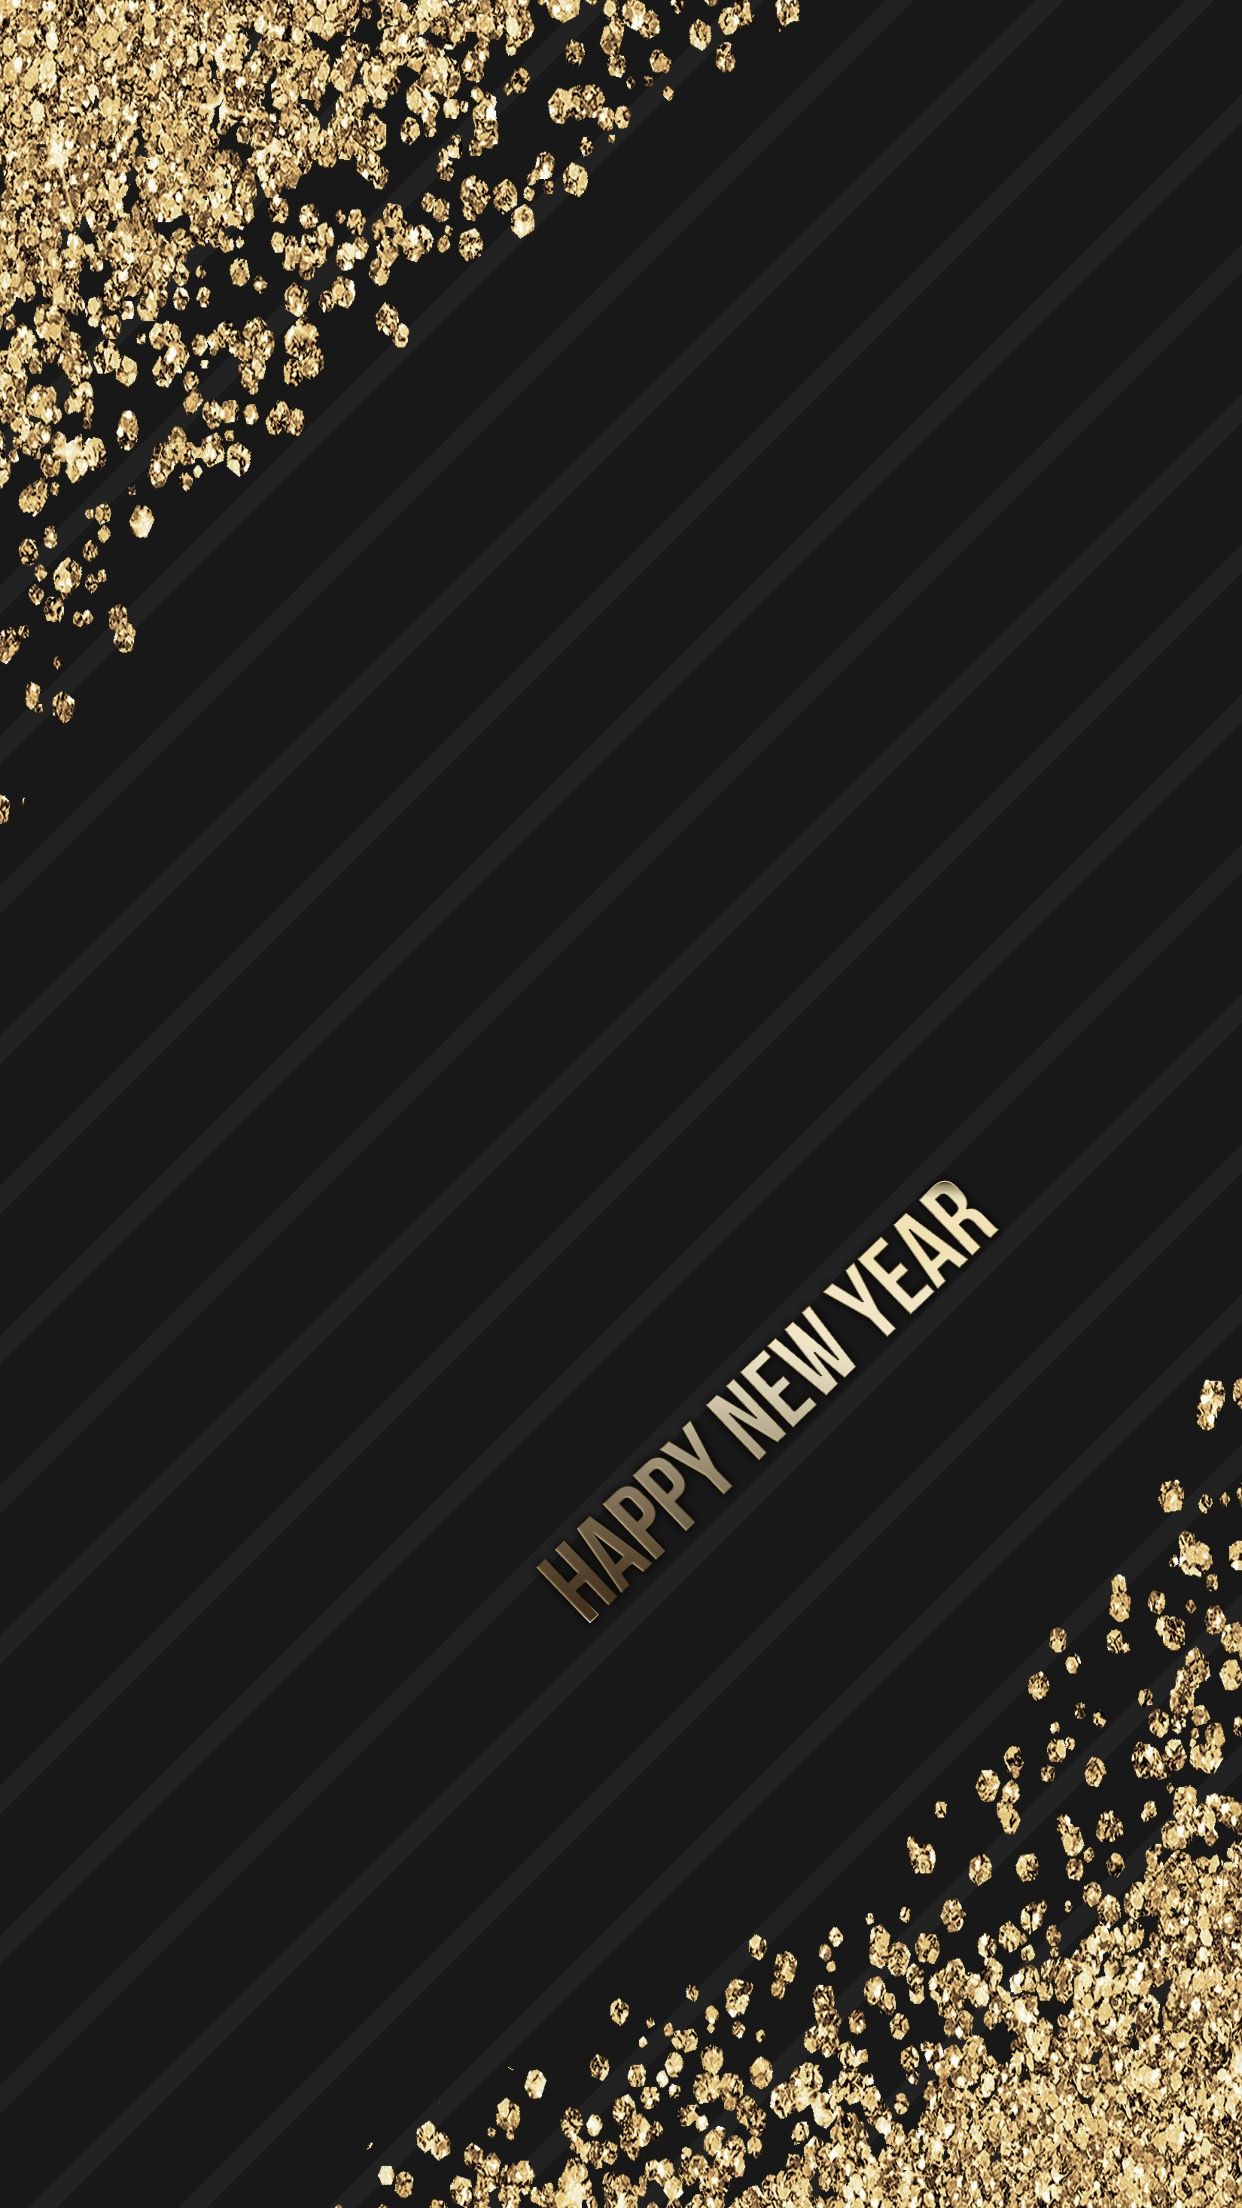 Black gold glitter wallpaper background iphone android hd happy new year new year wallpaper new year images happy new year images